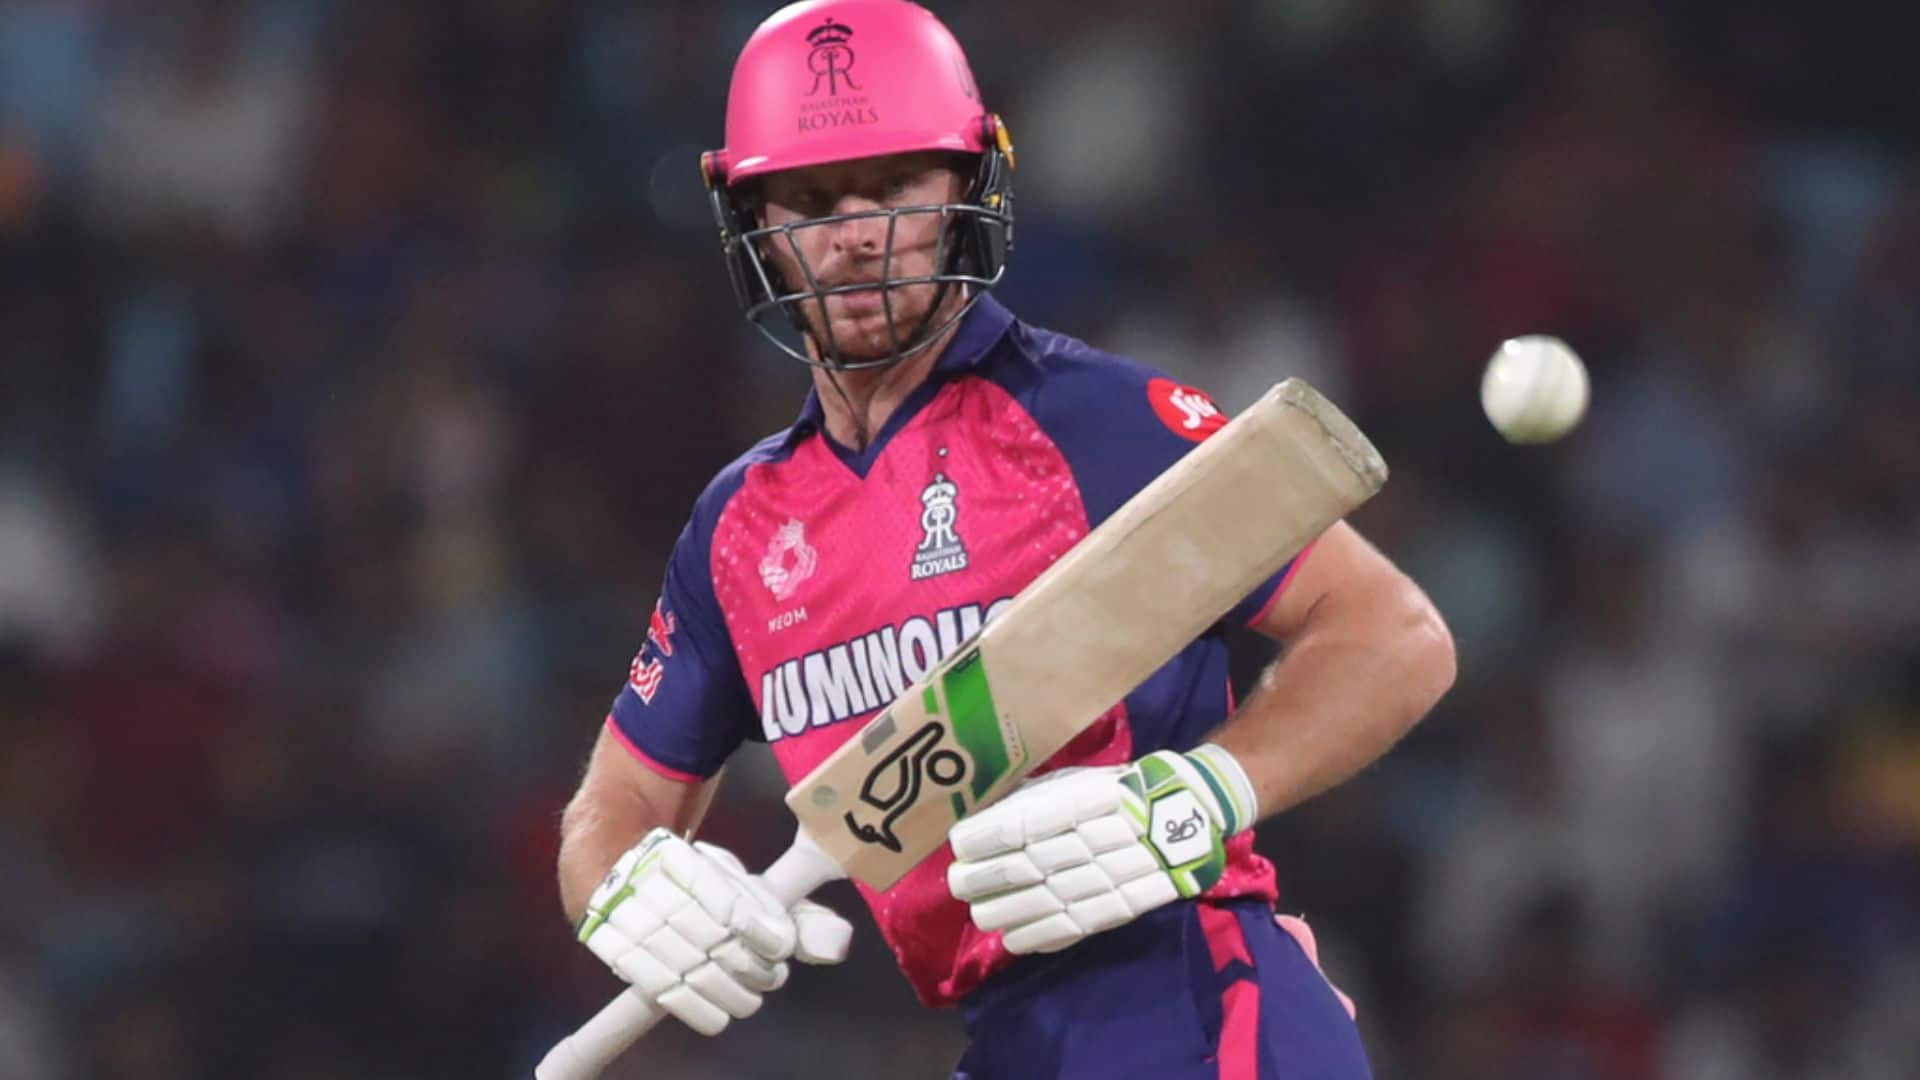 No Jos Buttler For RR In Knockouts As ECB Confirms Players' Unavailability For IPL Playoffs